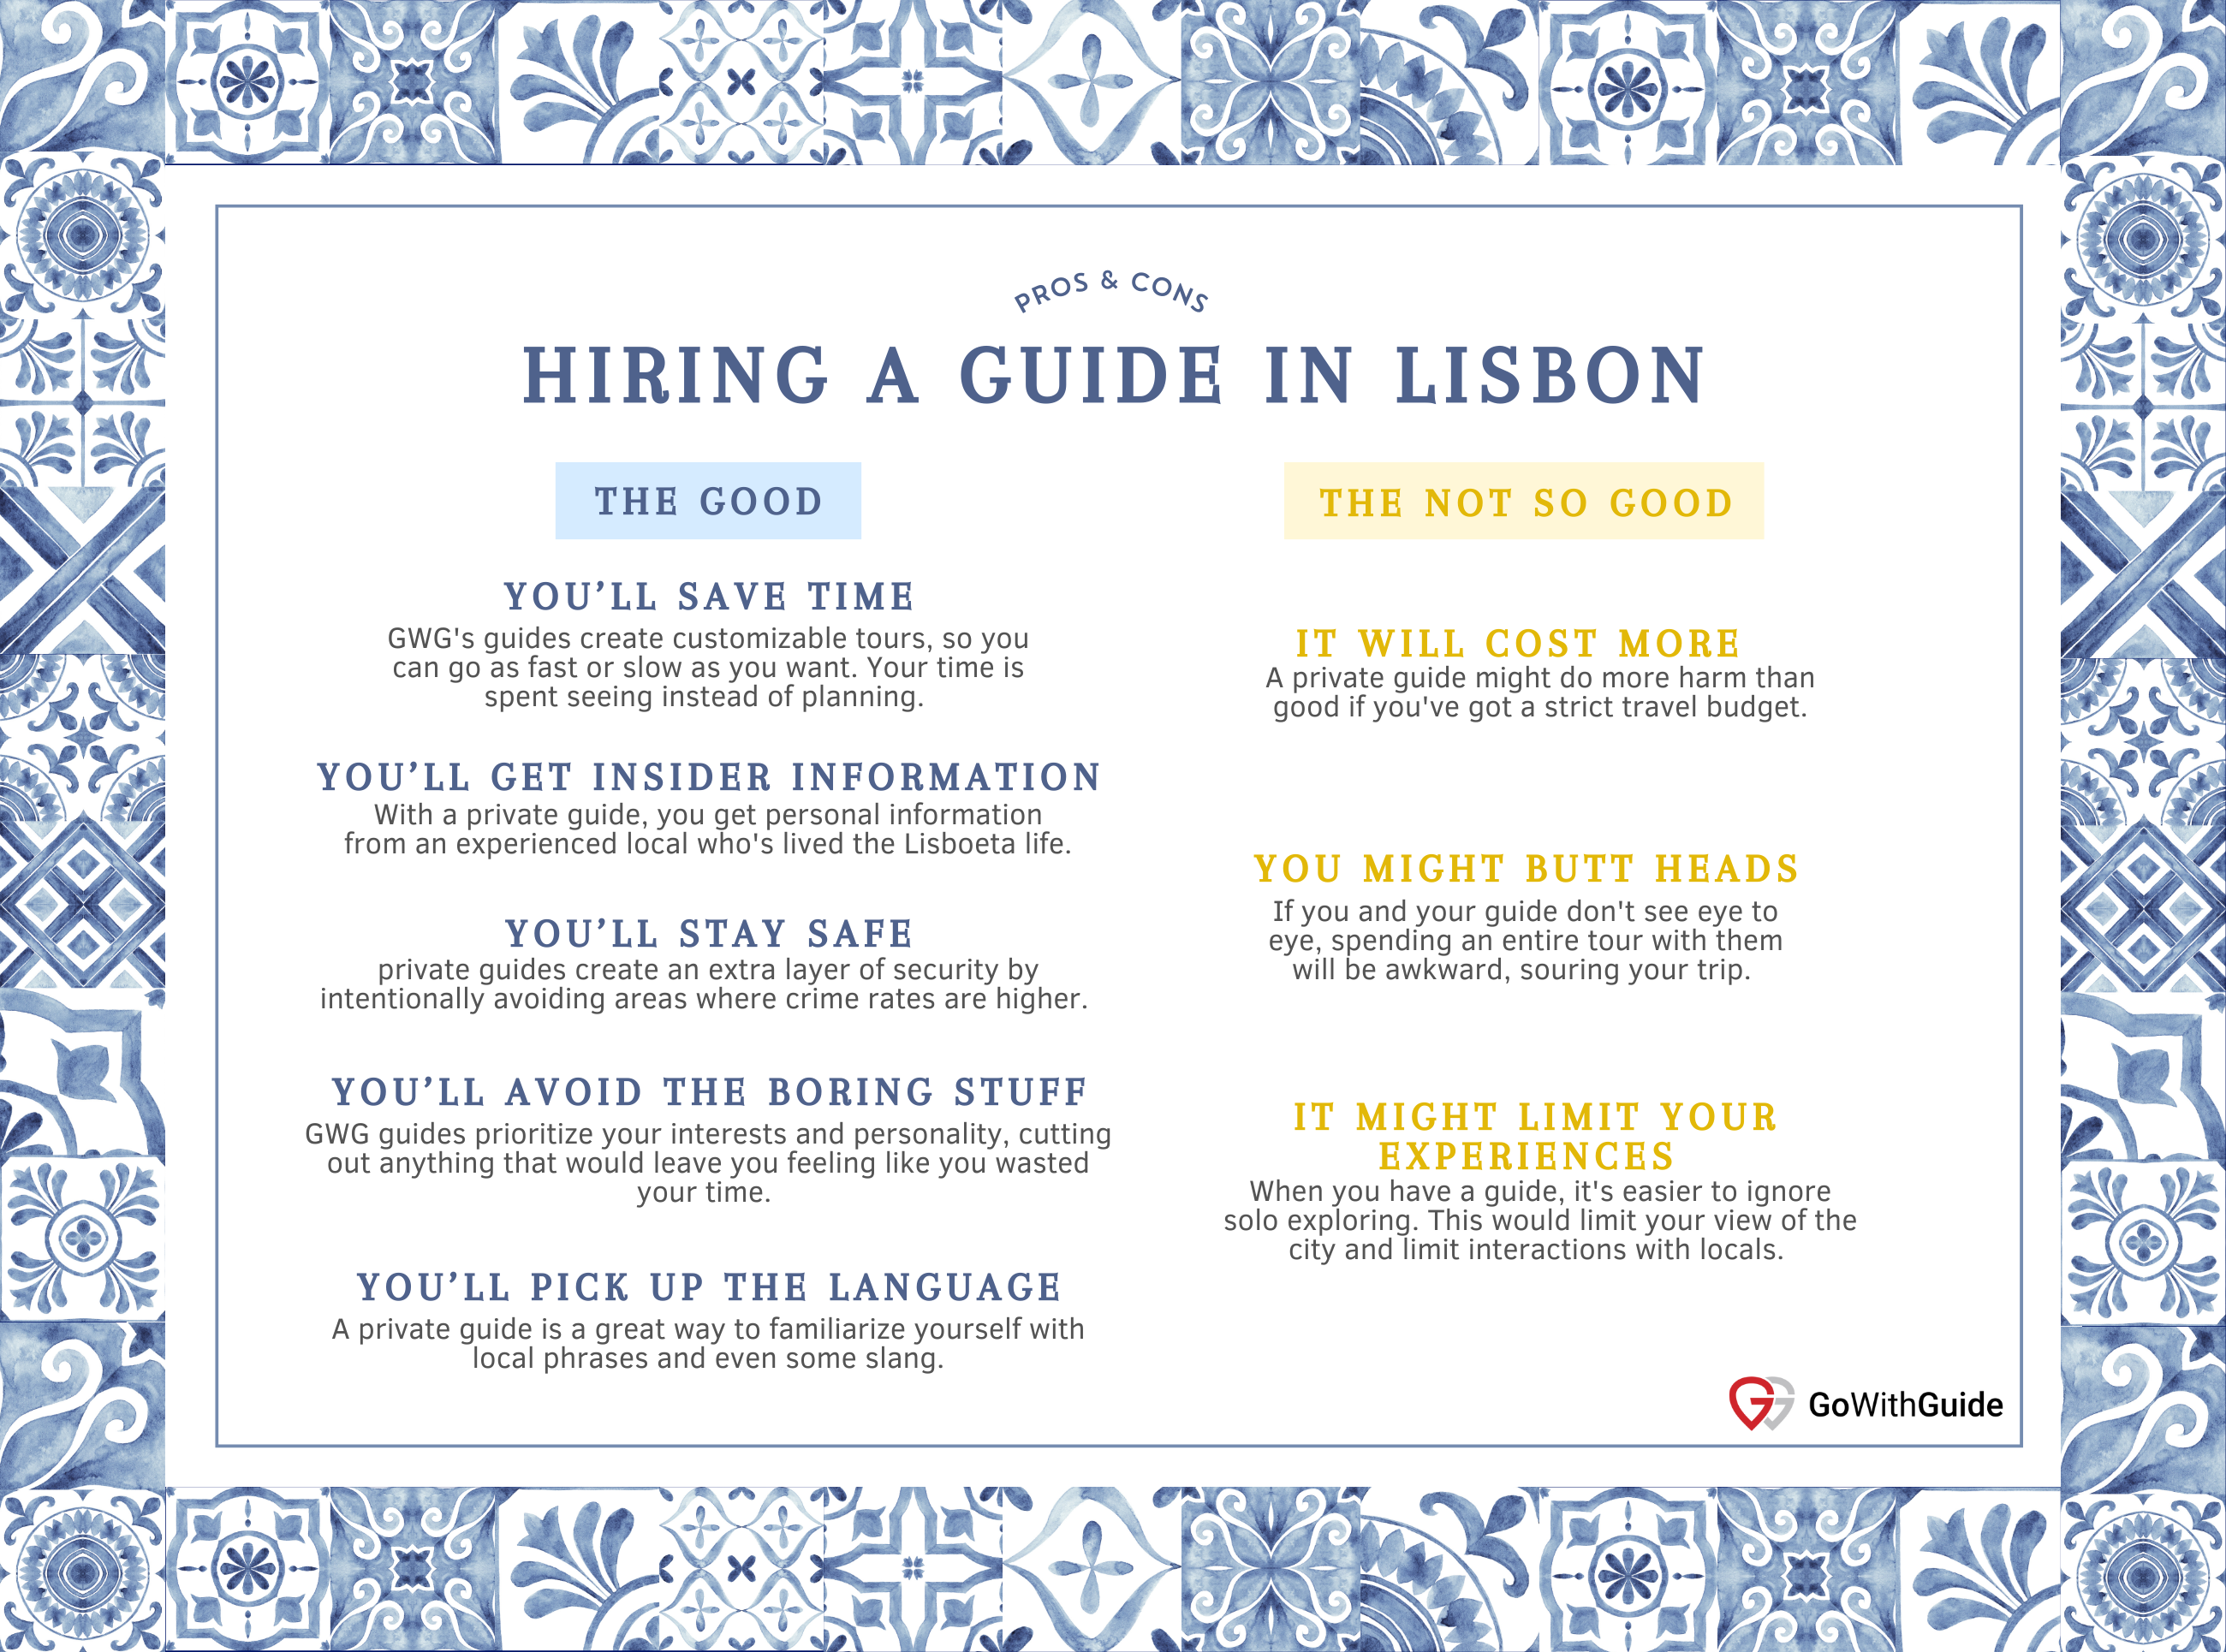 Hiring a Guide in Lisbon - Pros & Cons